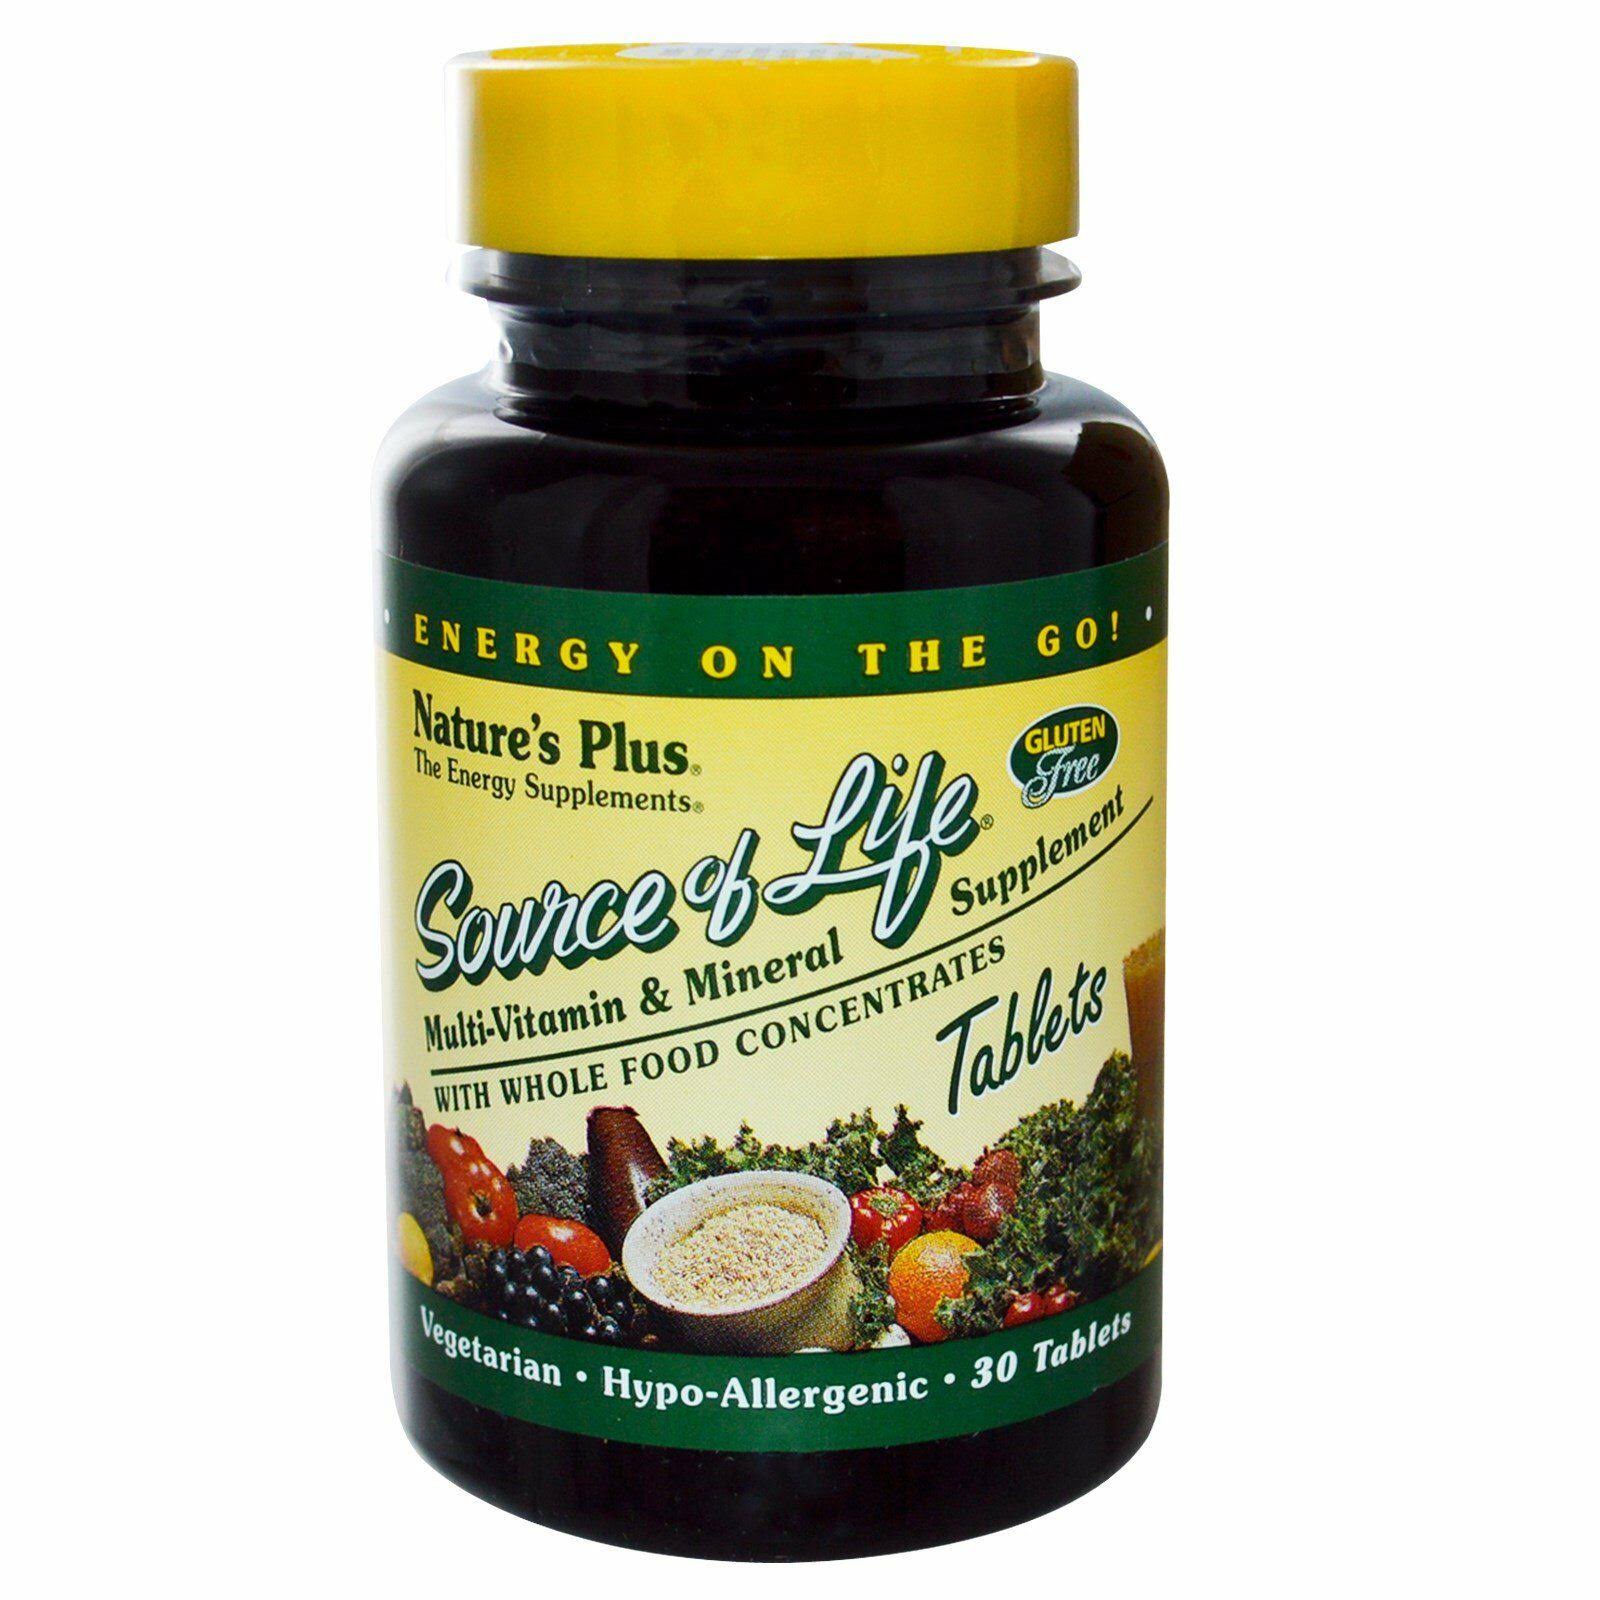 Source of Life Multi-Vitamin and Mineral Supplement - 30 Tablets